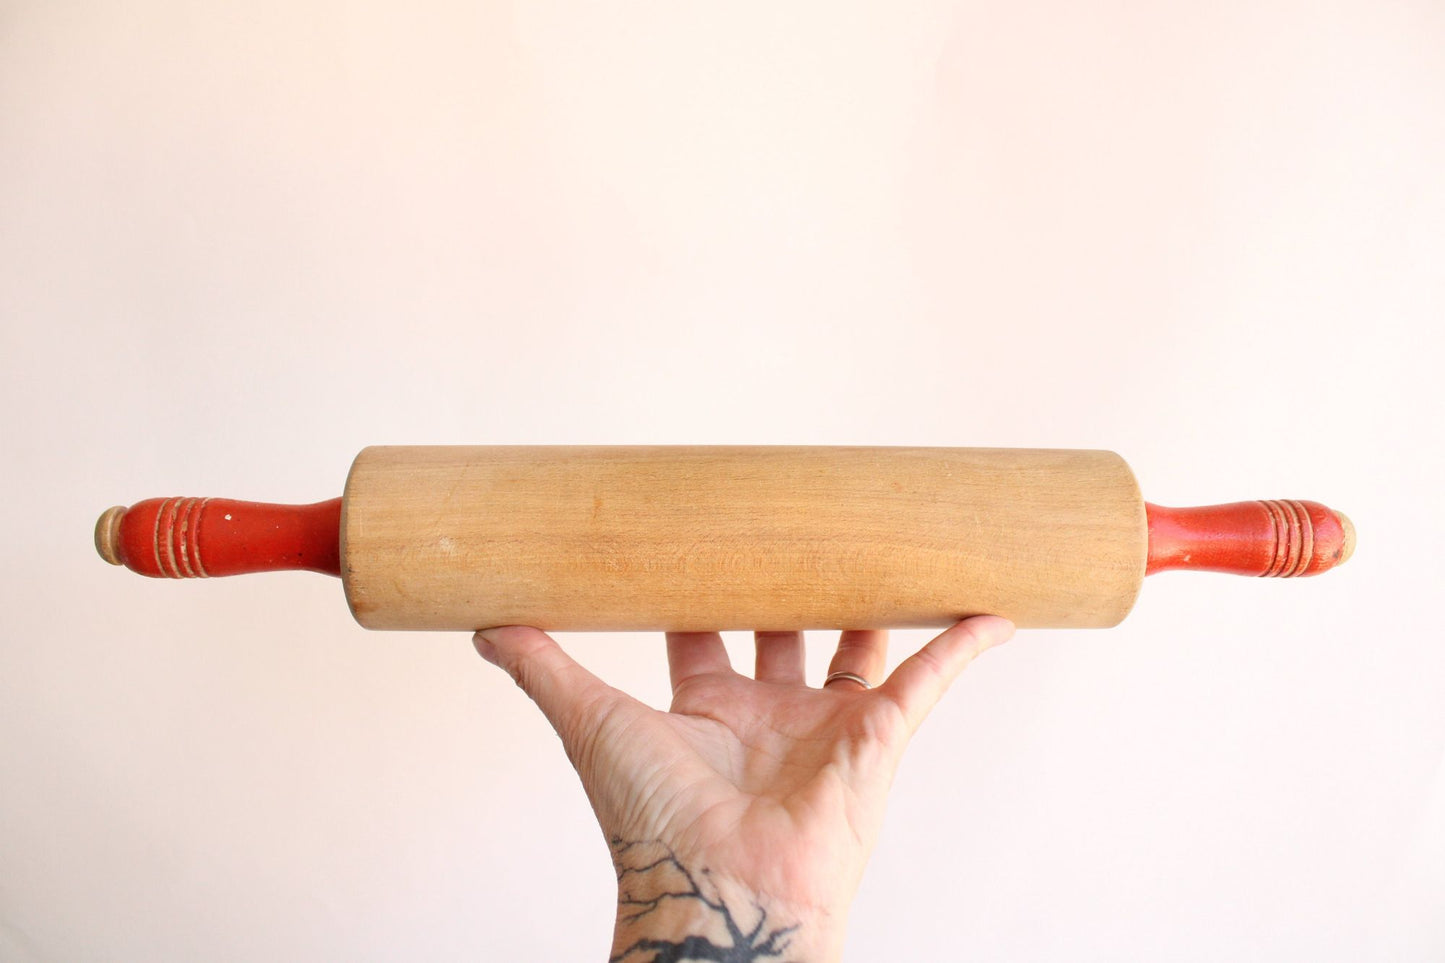 Vintage 1950s Wooden Rolling Pin